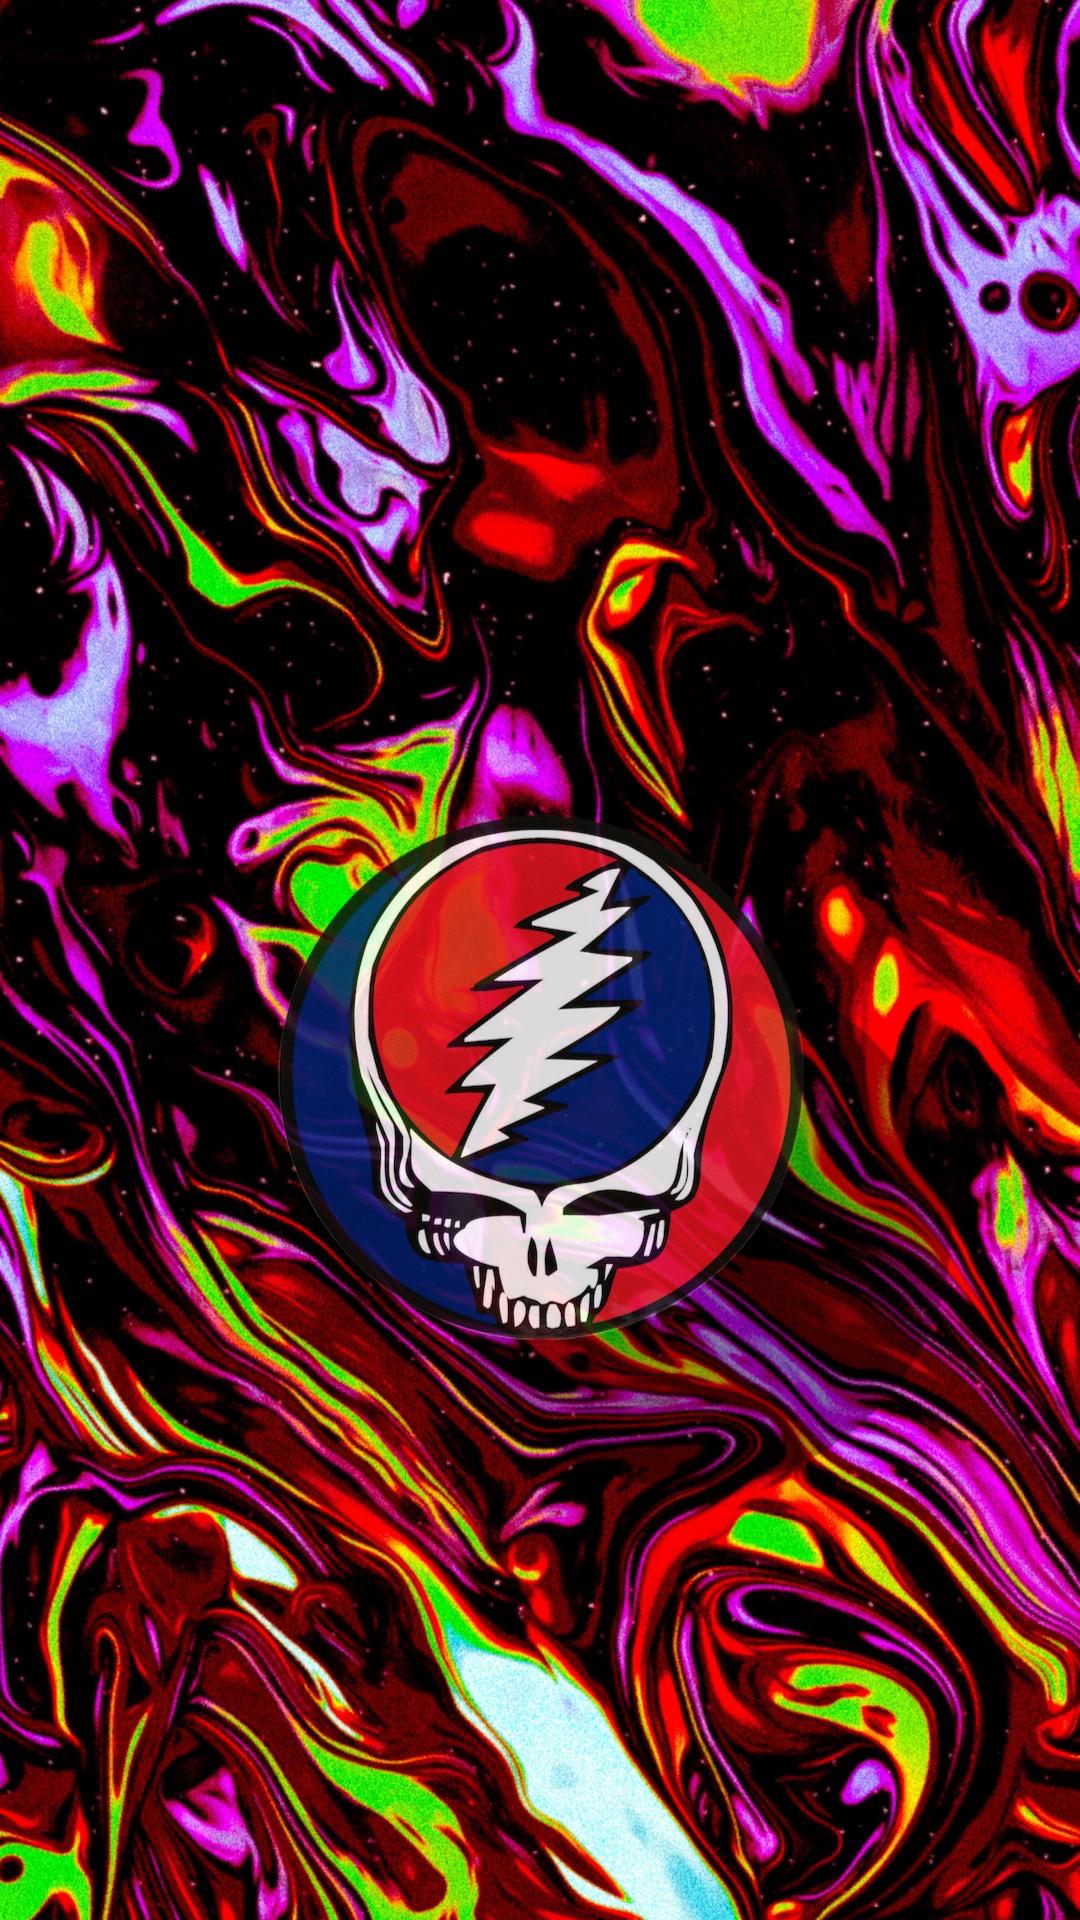 Made A Pretty Psychedelic iPhone Wallpaper That Some Of You May